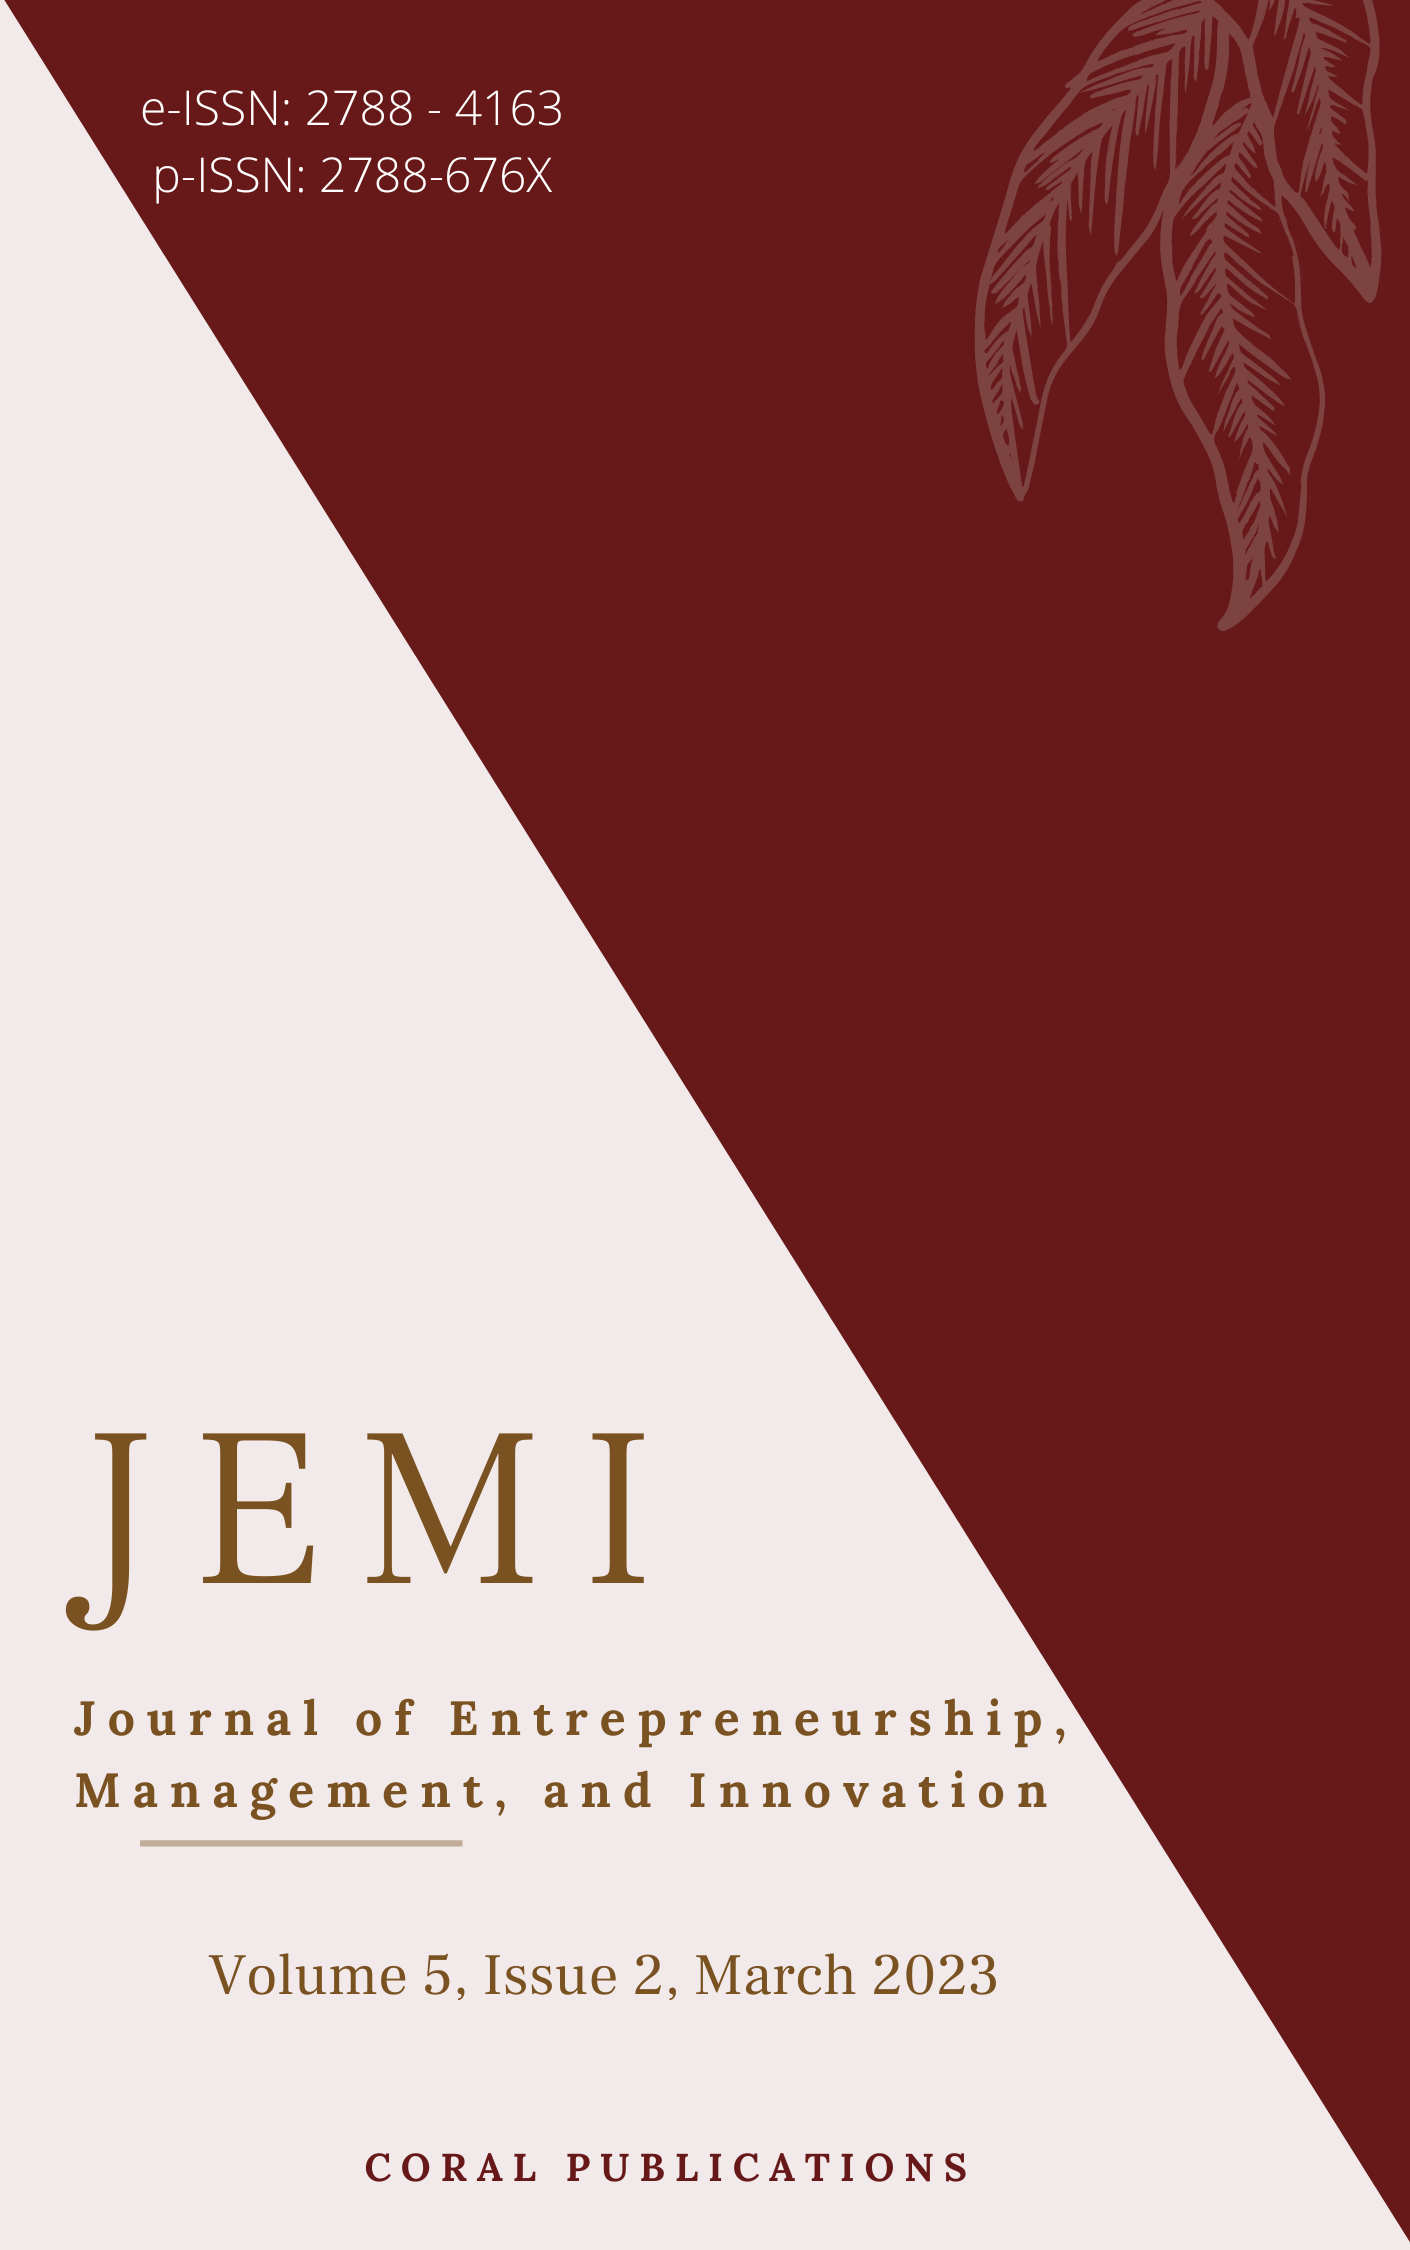 					View Vol. 5 No. 2 (2023): Journal of Entrepreneurship, Management, and Innovation (JEMI) March 2023
				